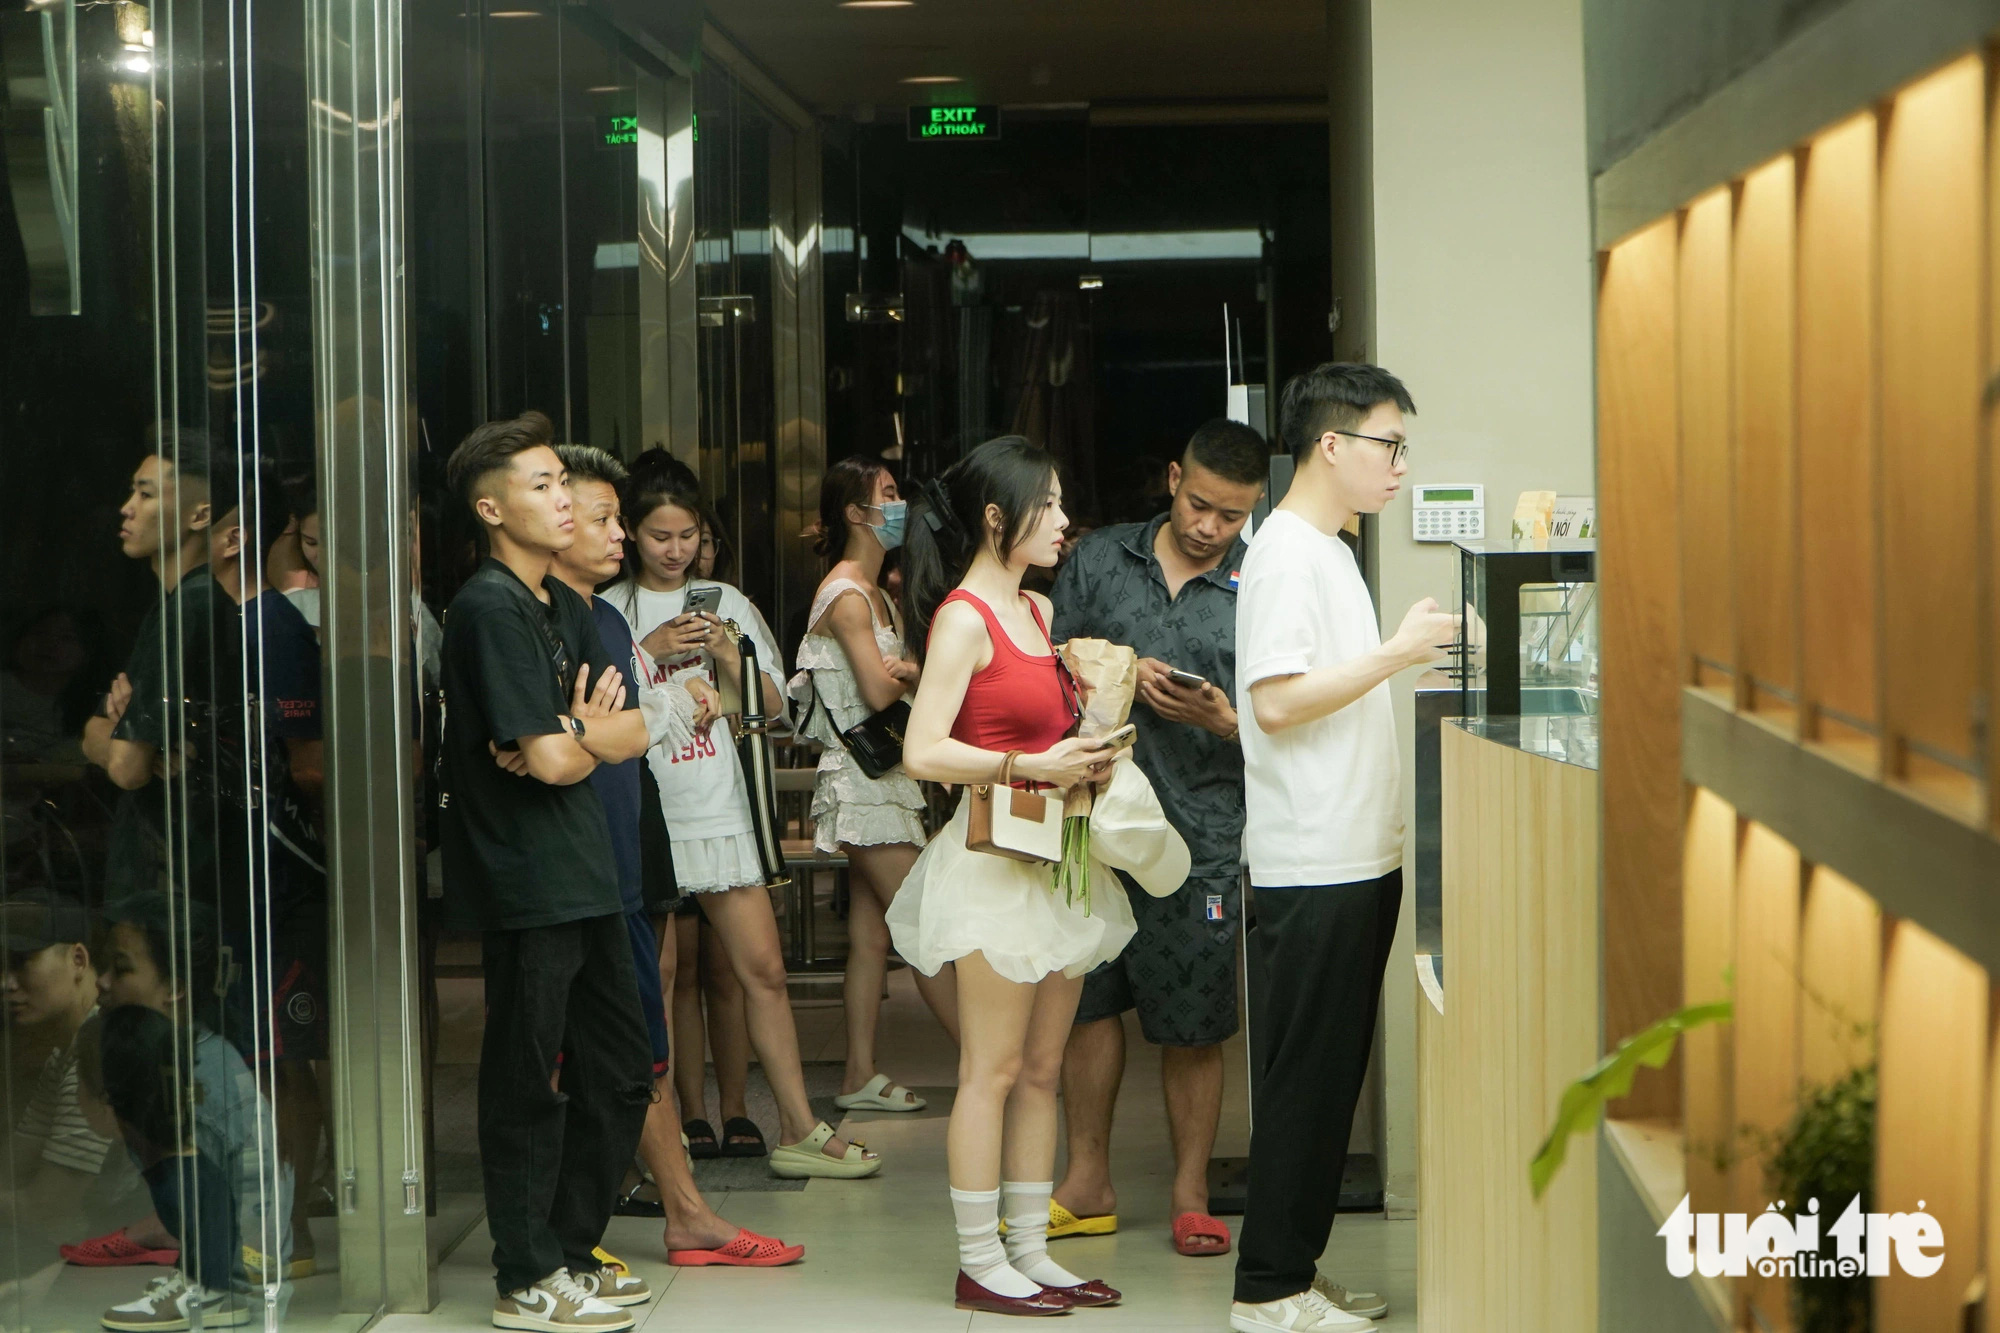 Customers line up at the order counter at a coffee shop on Tong Dan Street in Hoan Kiem District, Hanoi, at dawn on June 14, 2024. Photo: Pham Tuan / Tuoi Tre